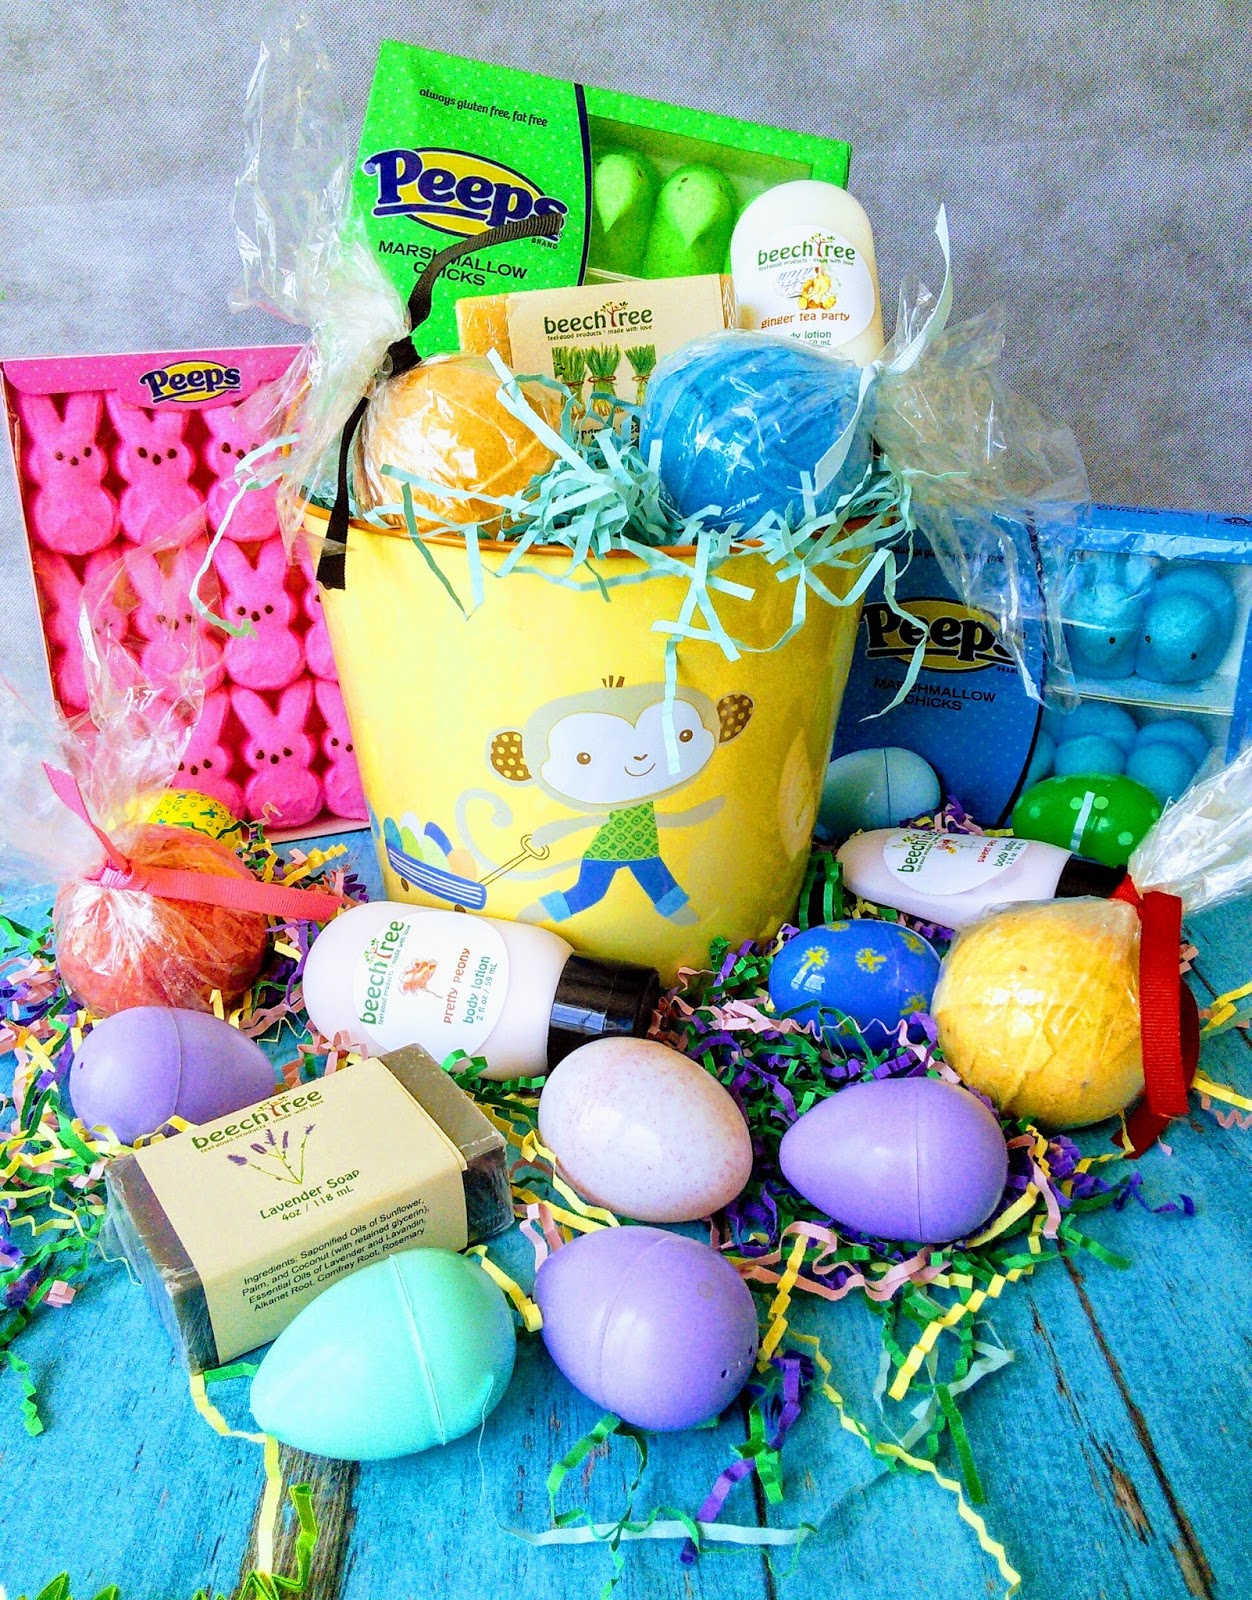 Check out some idea for Easter baskets!